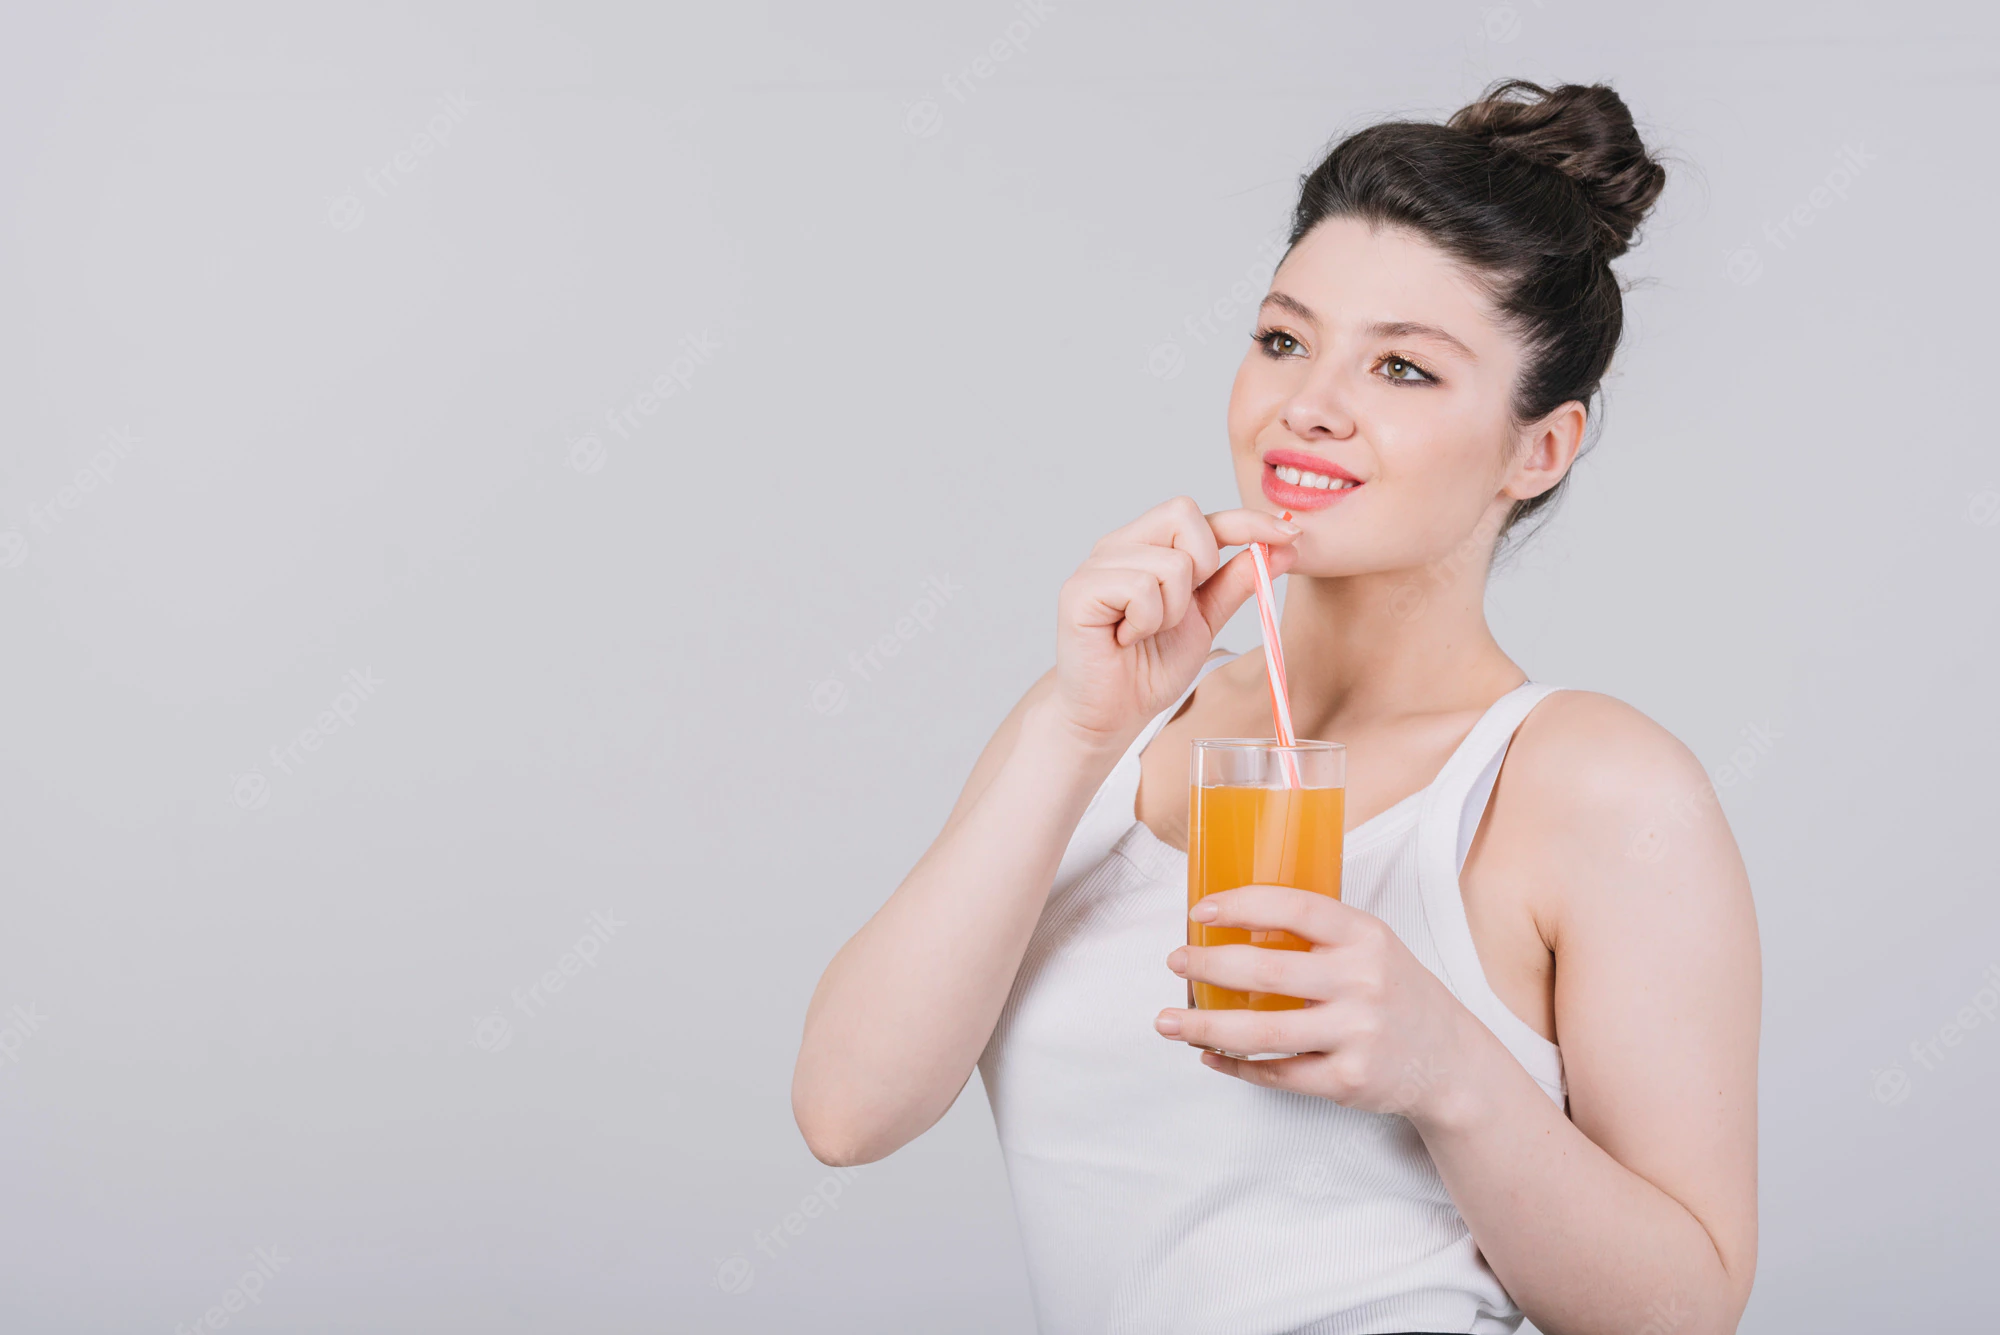 nutritional value of female juices